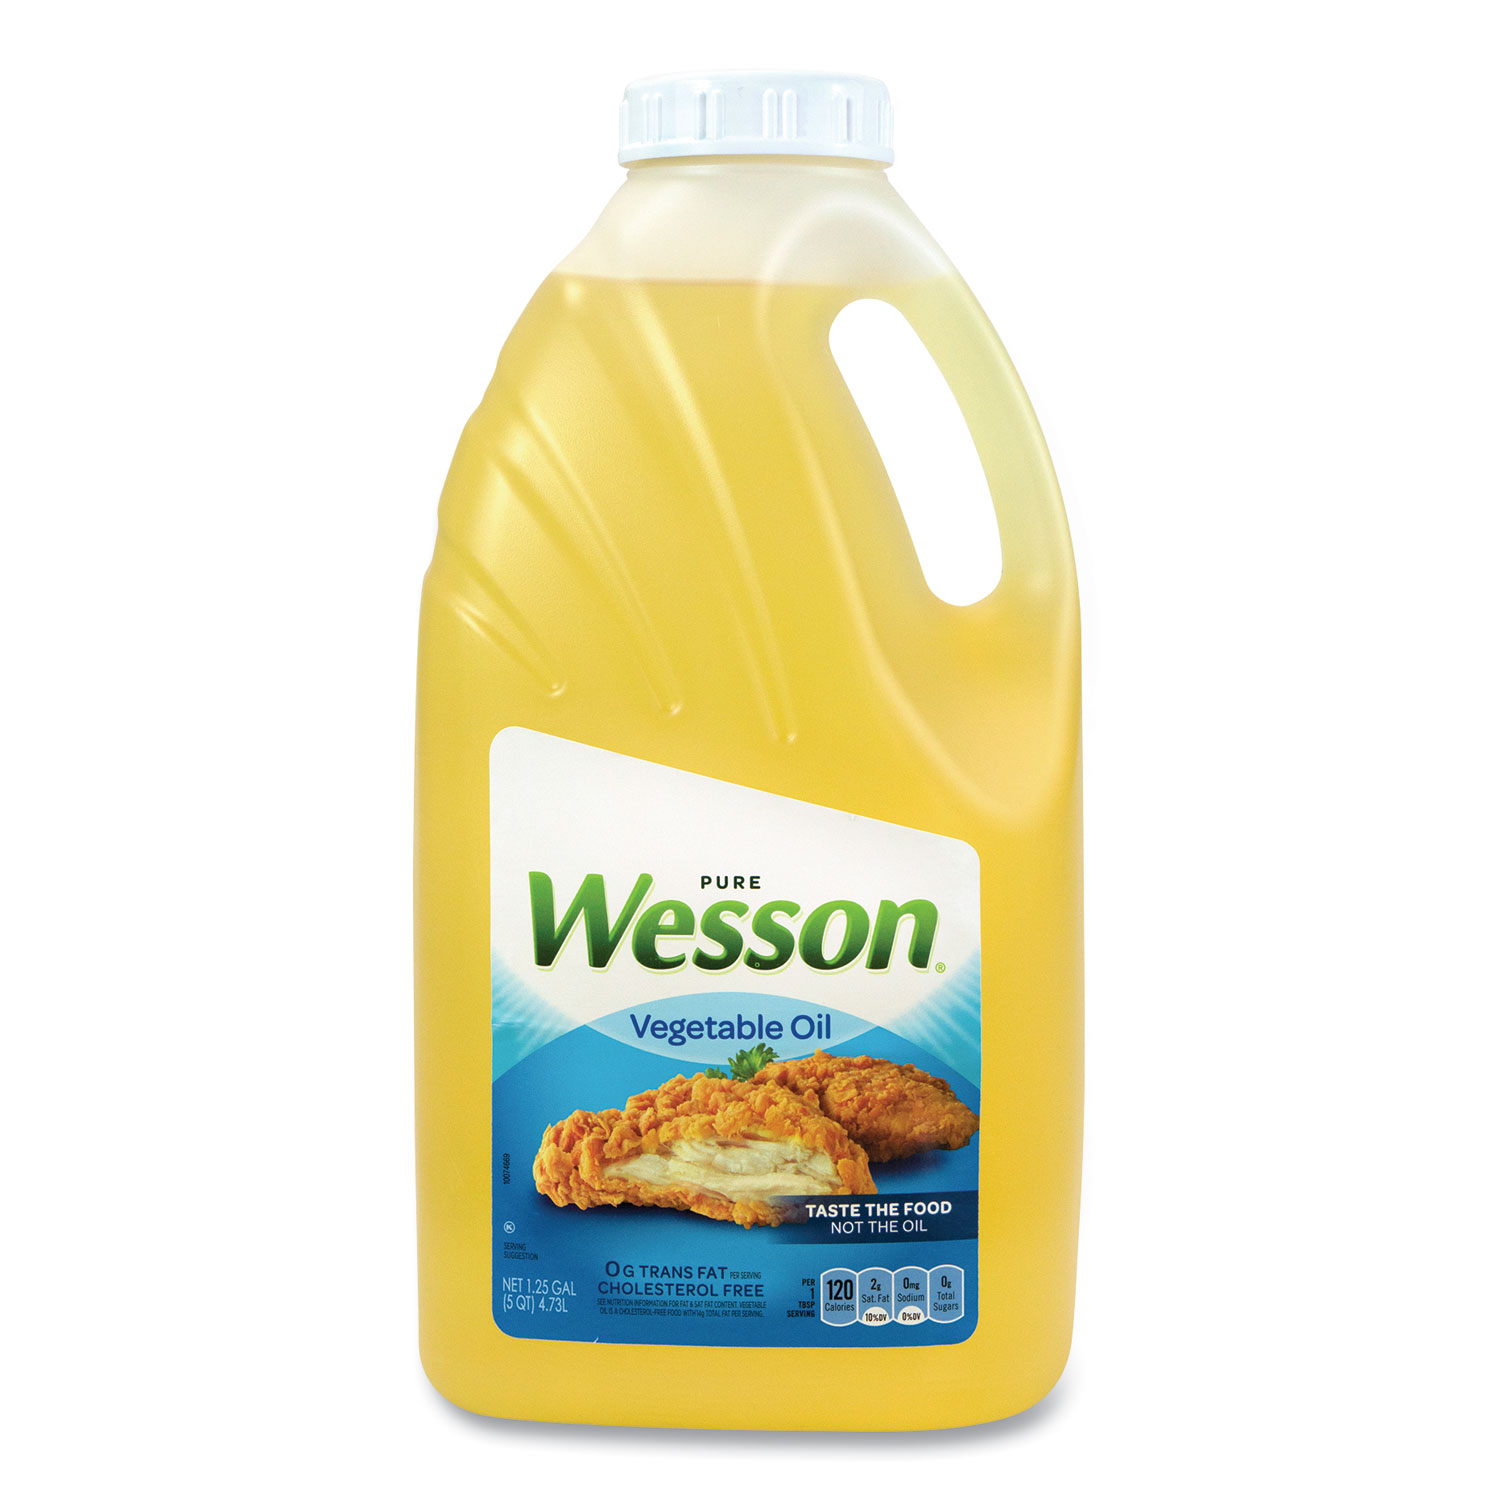  Pure Wesson 61565 Vegetable Oil, 1.25 gal Bottle, Free Delivery in 1-4 Business Days (GRR90000147) 